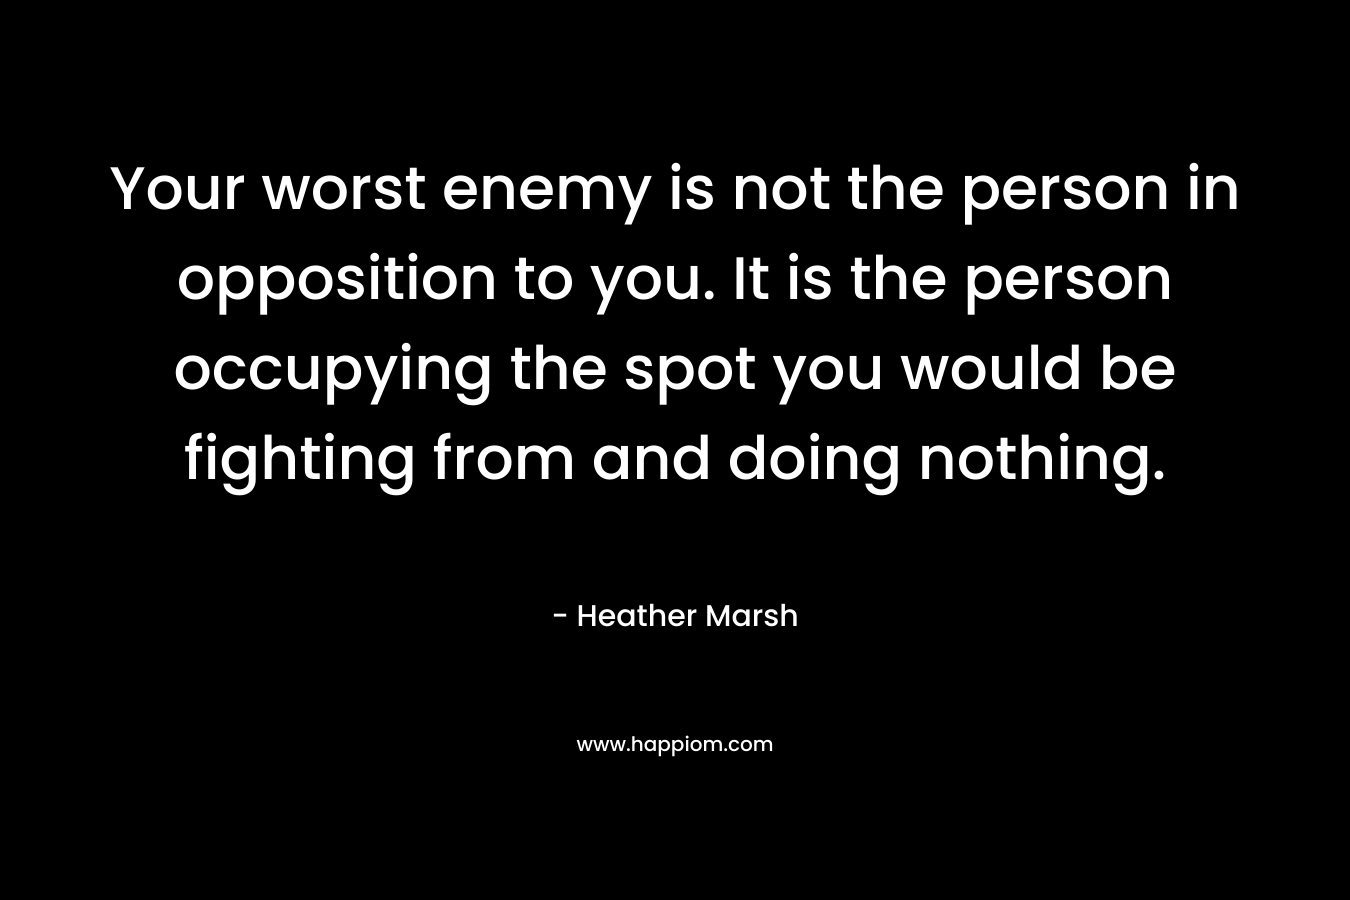 Your worst enemy is not the person in opposition to you. It is the person occupying the spot you would be fighting from and doing nothing.